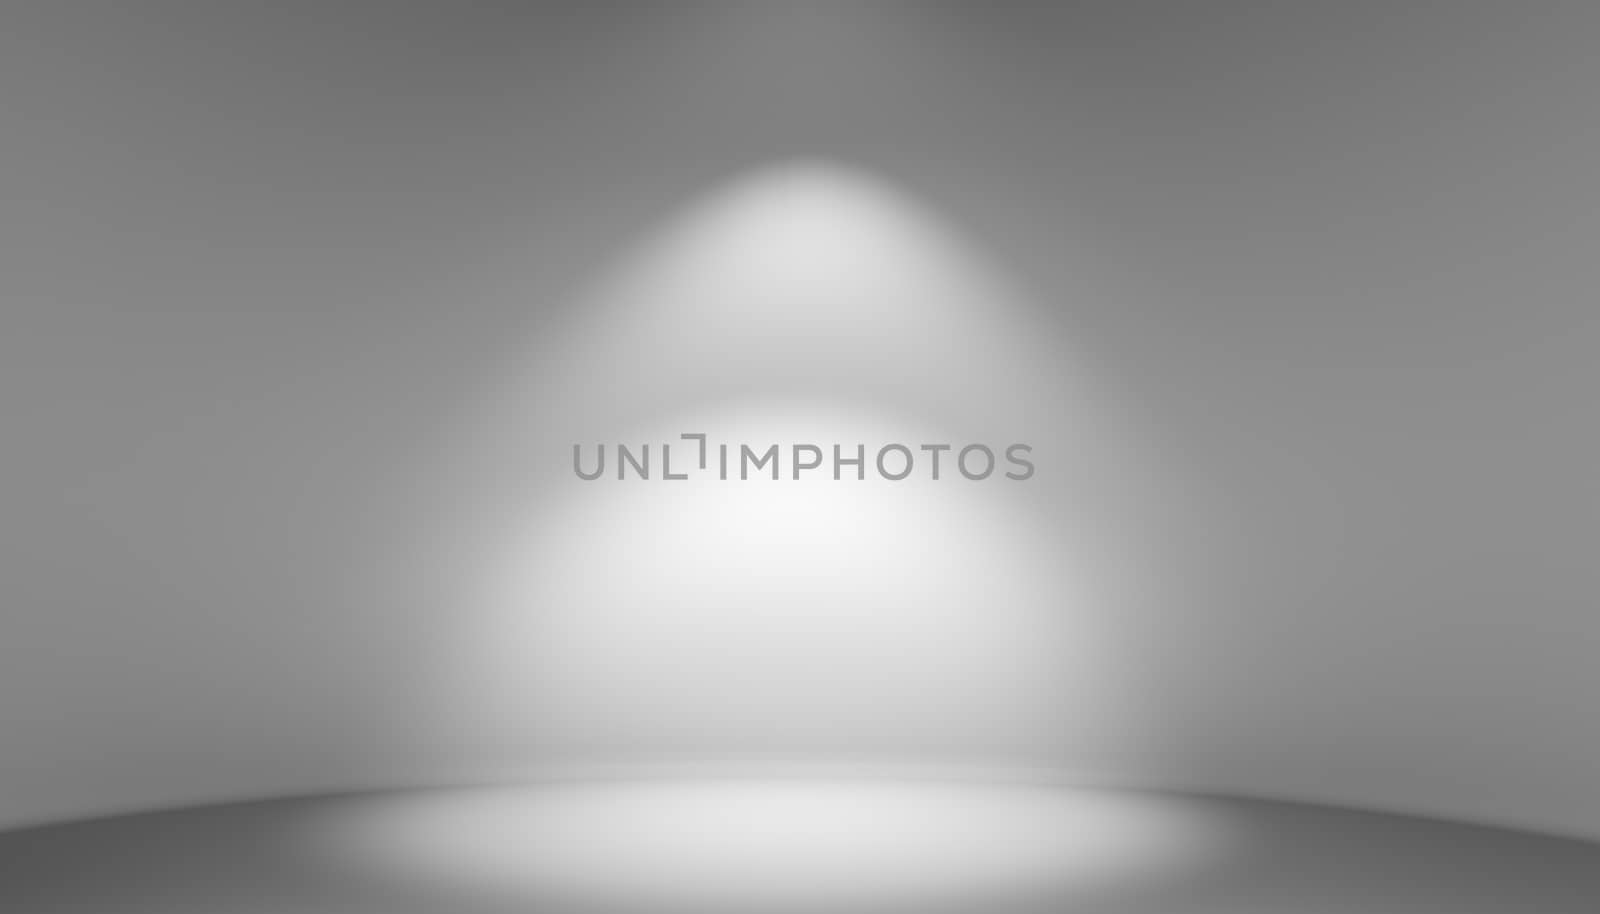 Empty light interior for exhibition. Gray room abstract background. 3D illustration